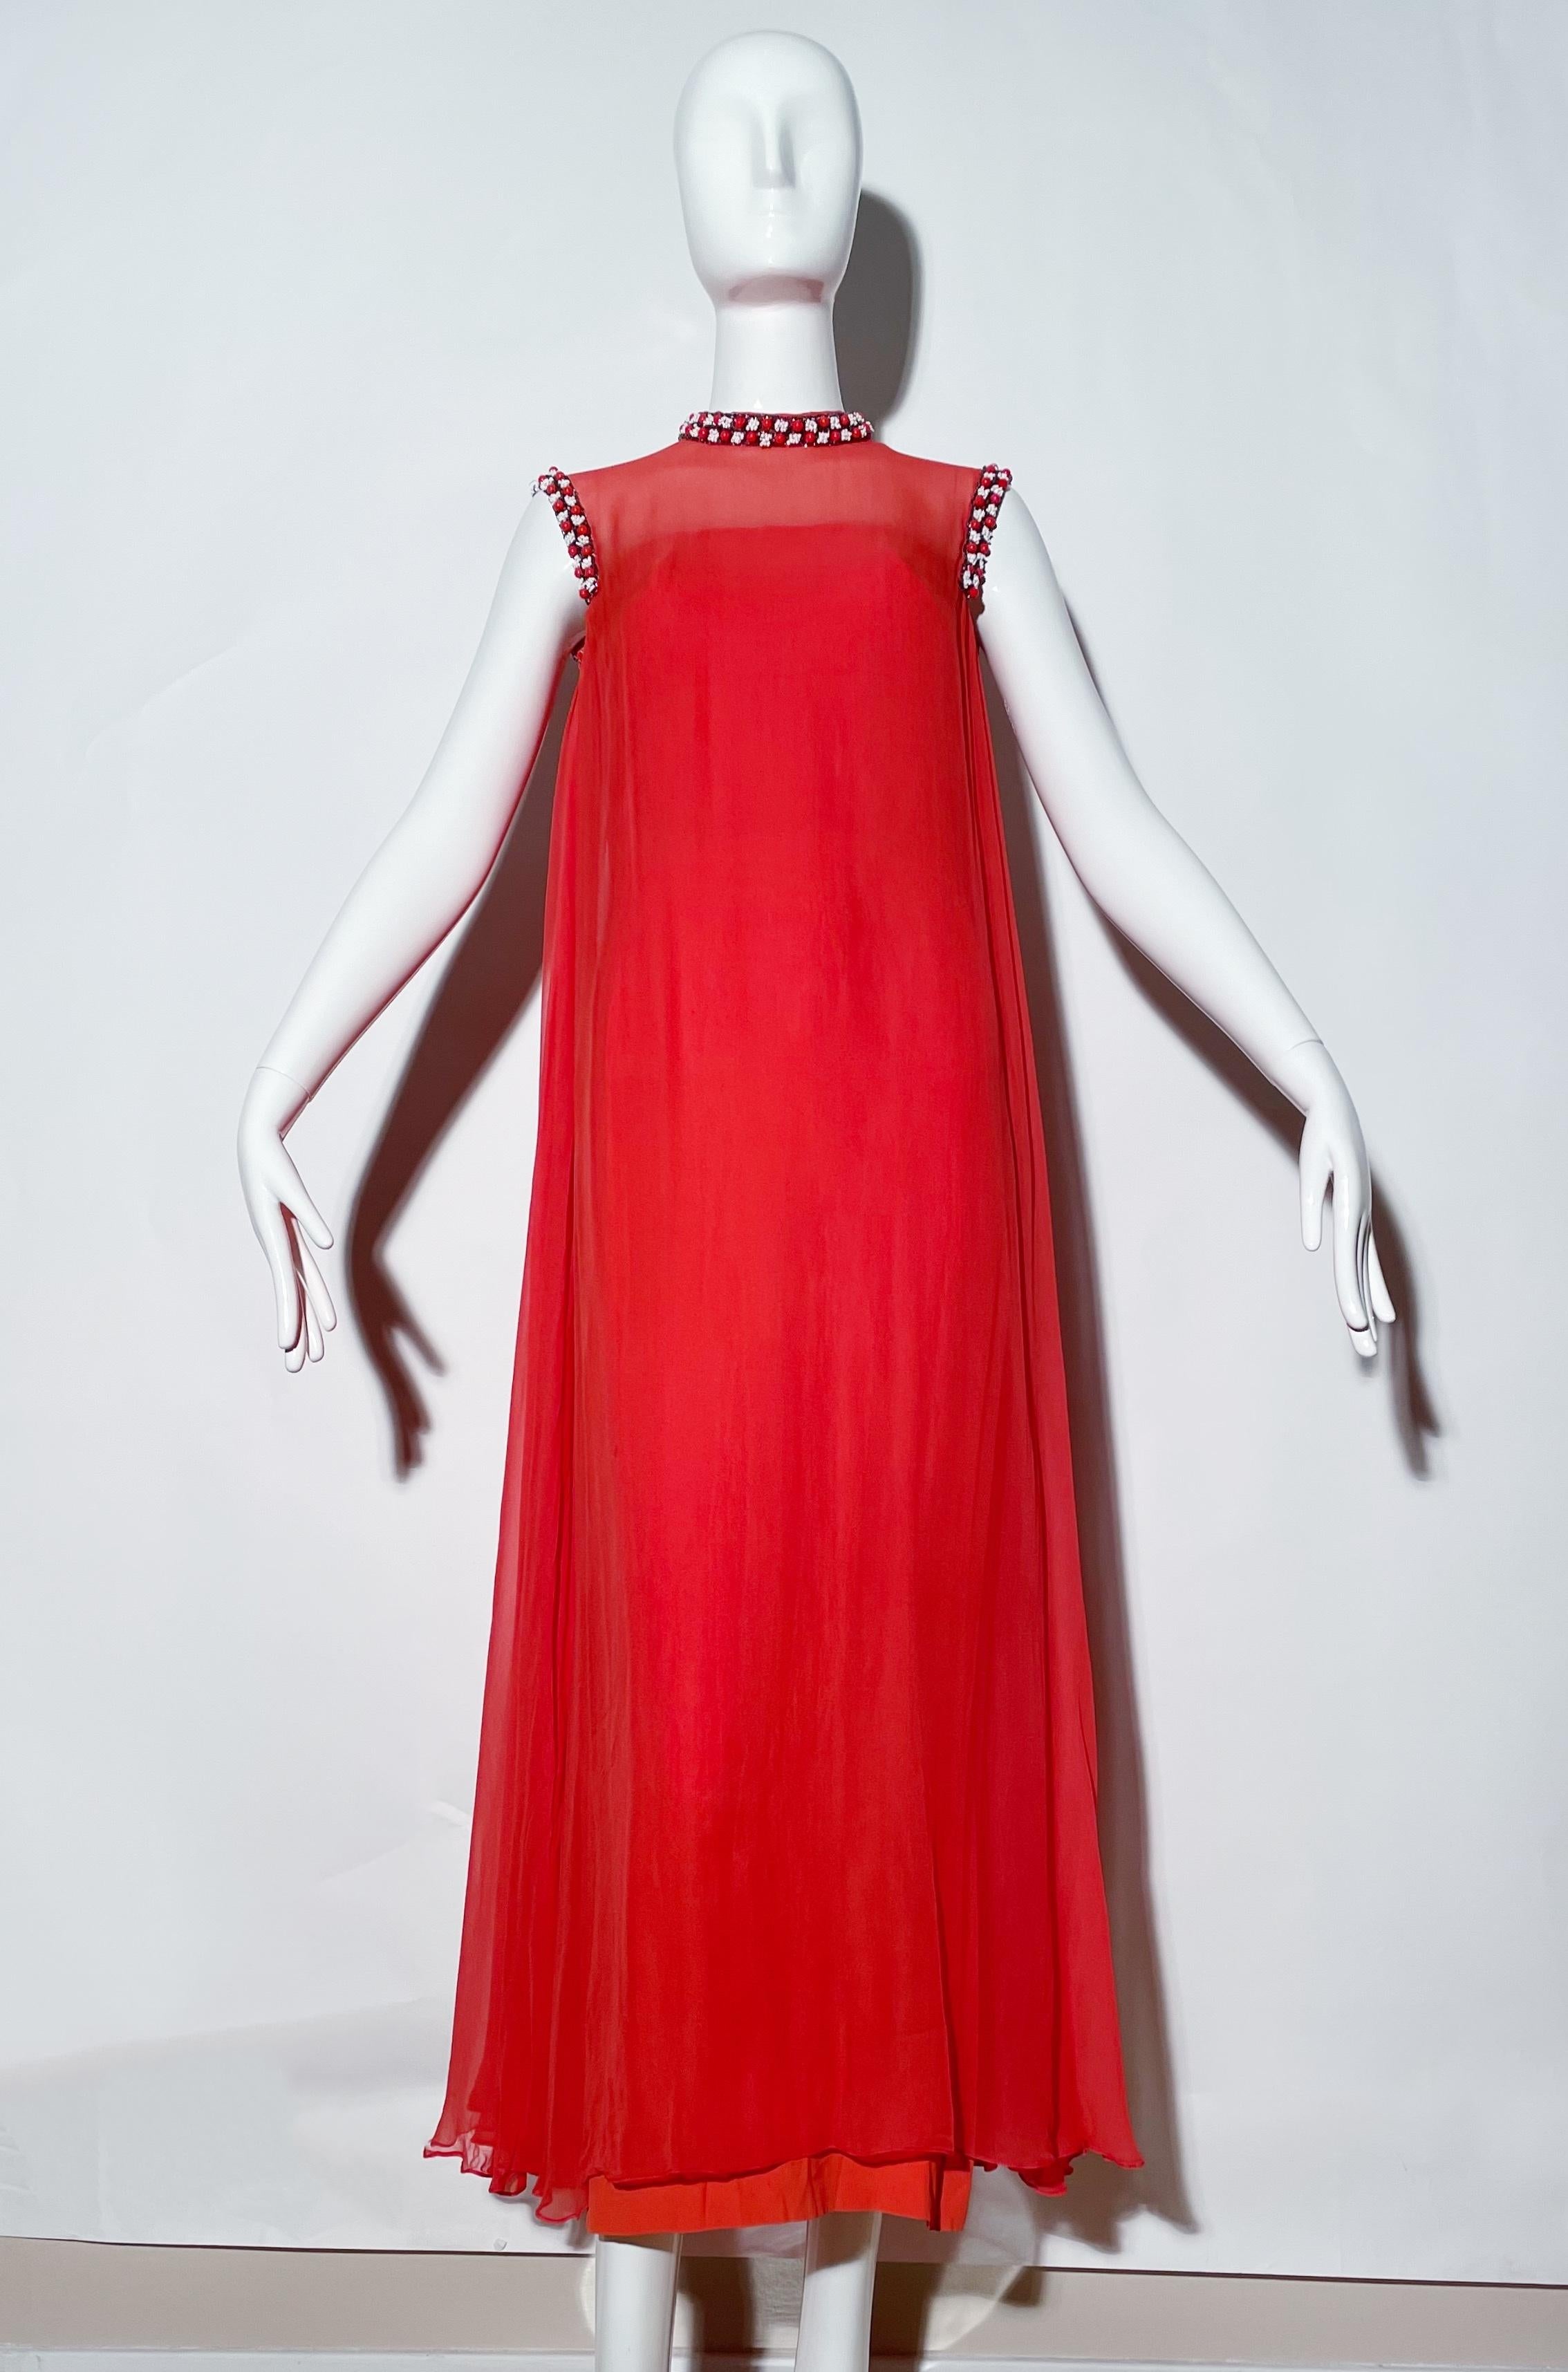 Coral silk floor length gown. Beaded neckline and armpit. Rear zipper closure. Rear button closures. Lined. 
*Condition: good vintage condition. Missing few beads around armpit. 

Measurements Taken Laying Flat (inches)—
Shoulder to Shoulder: 16